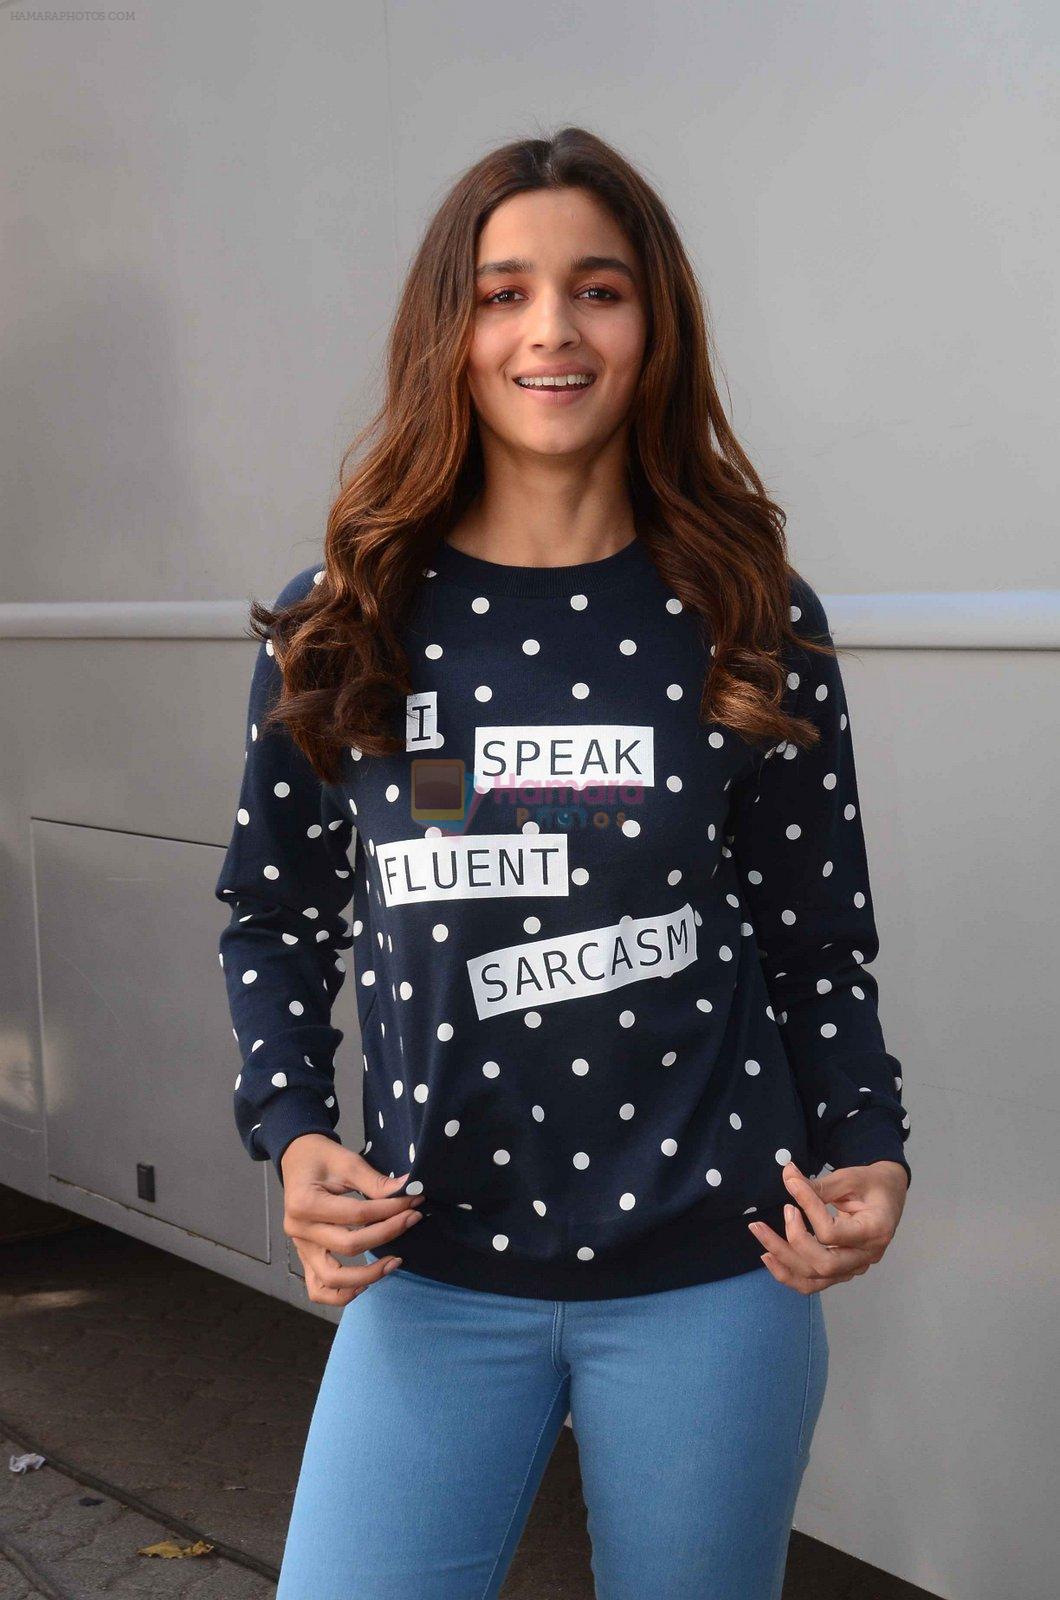 Alia Bhatt at Kapoor N Sons promotions in Mumbai on 13th March 2016